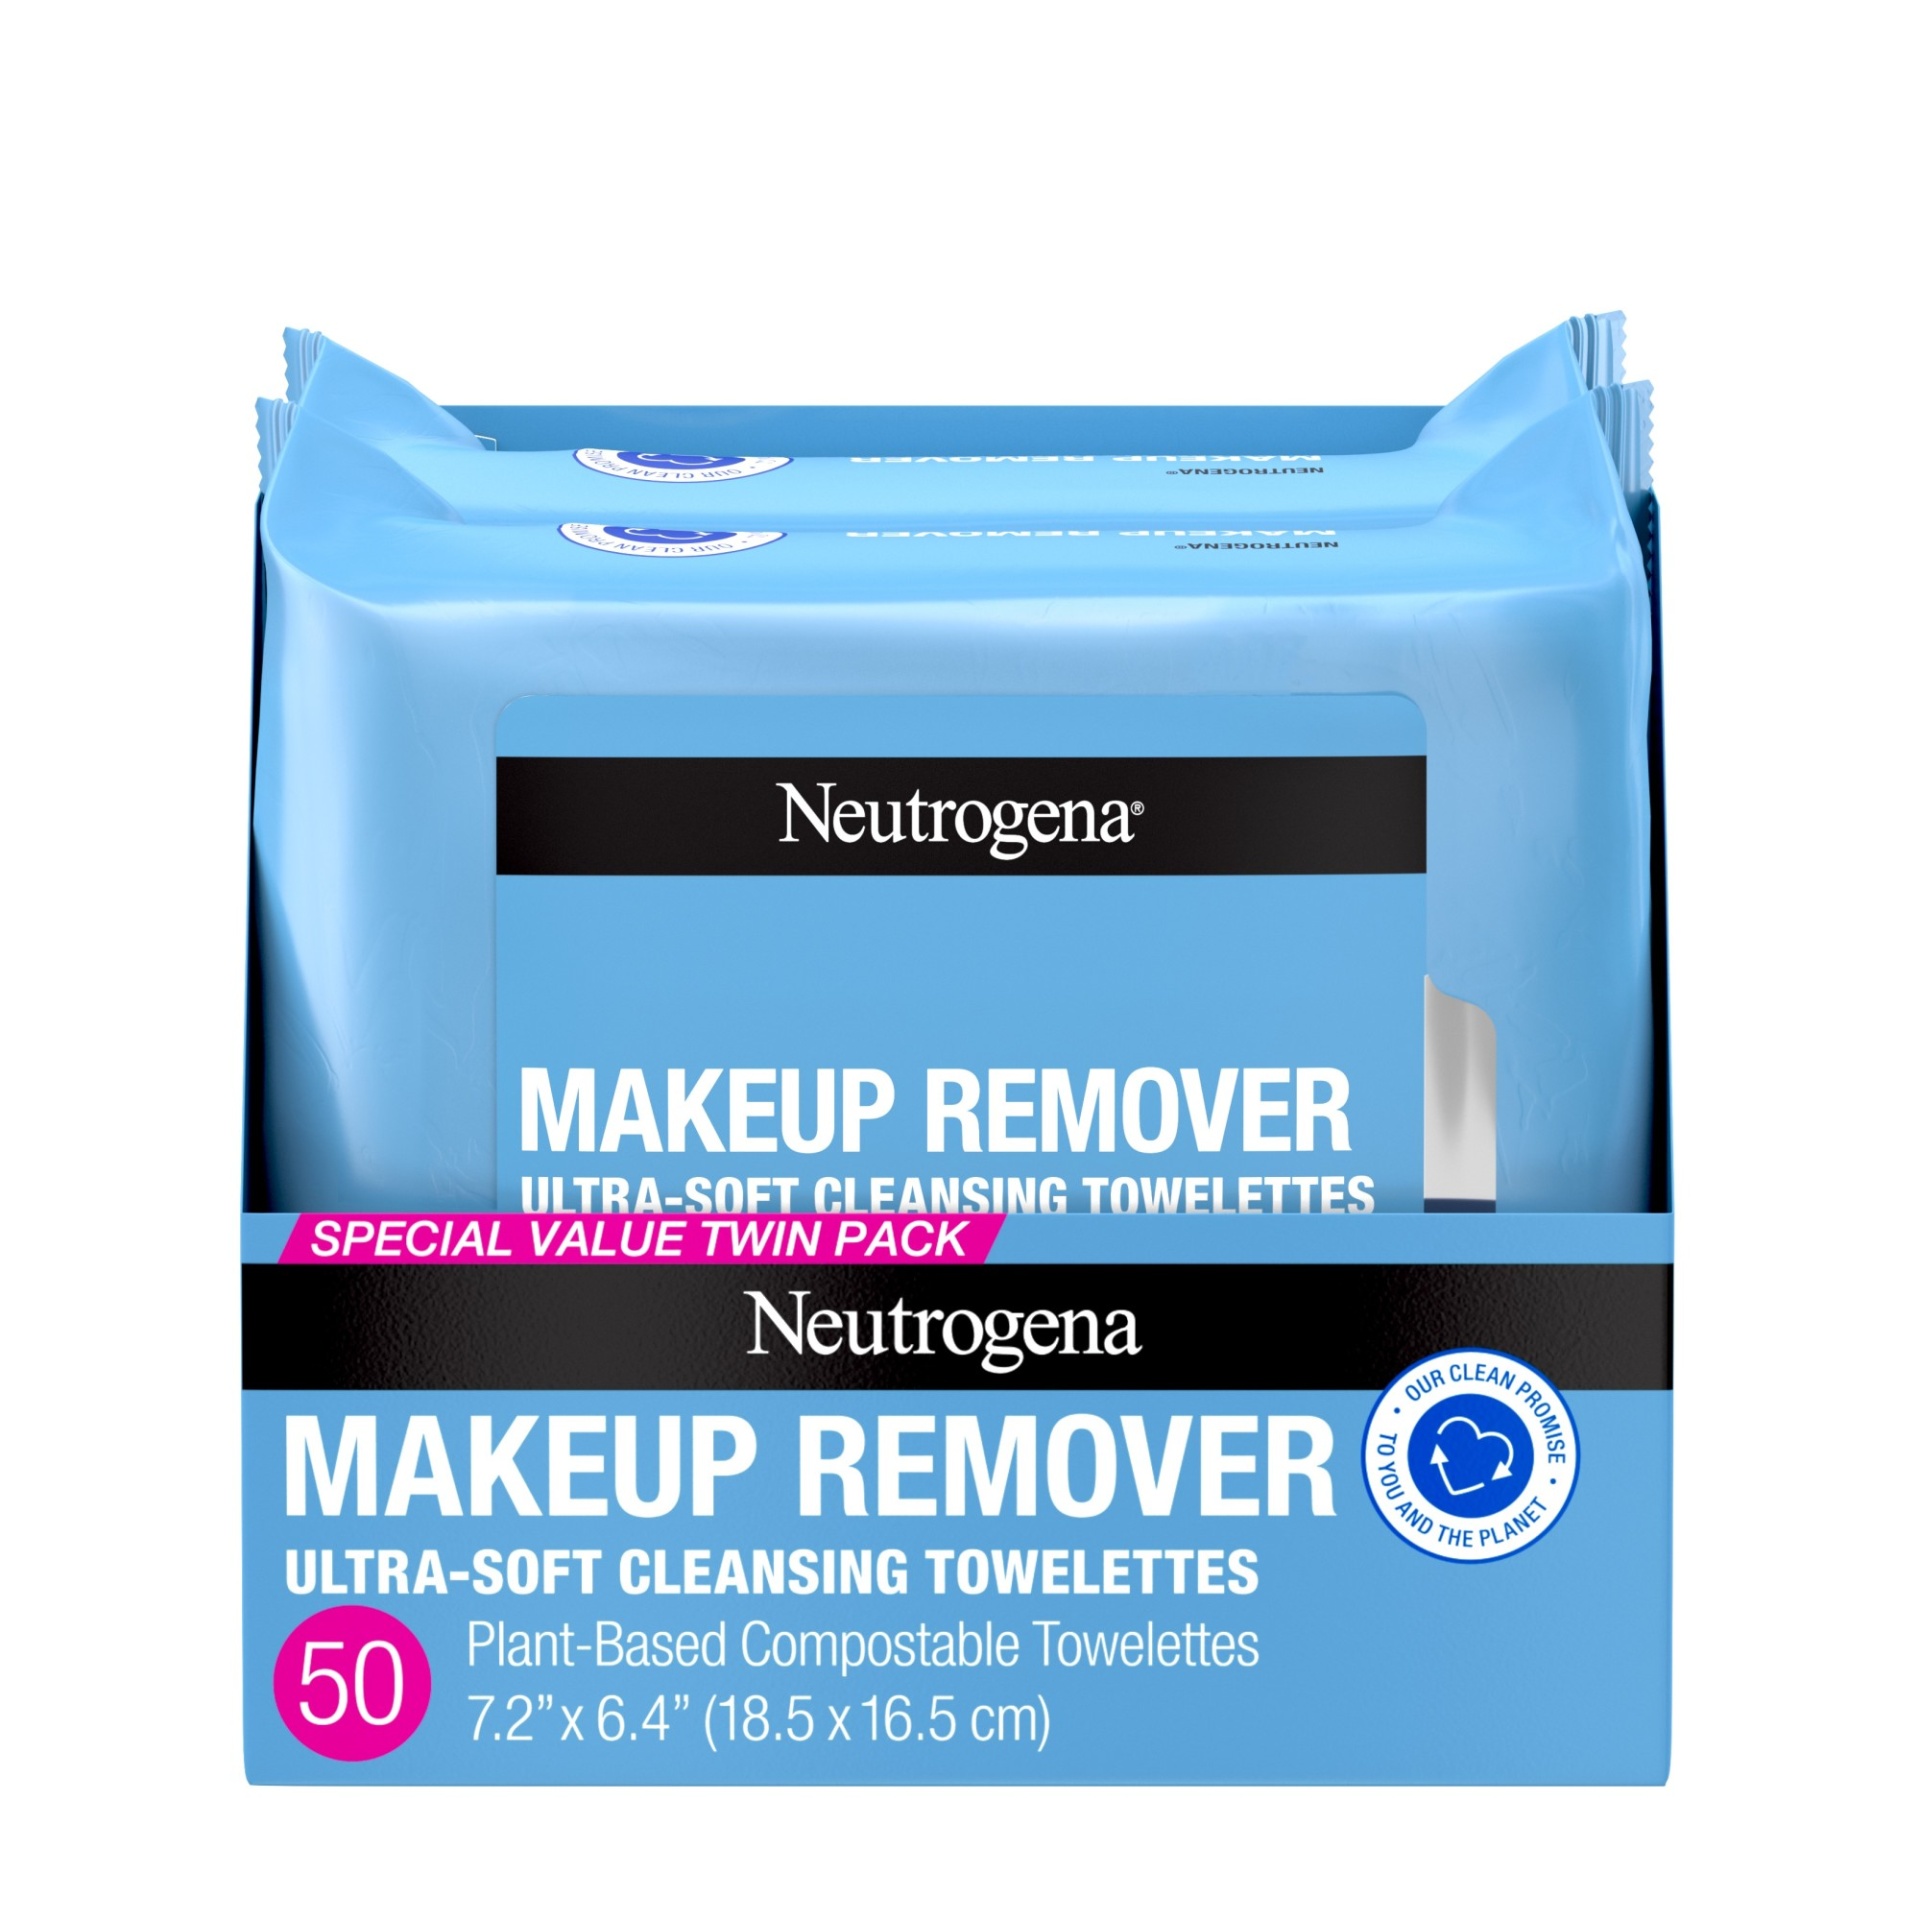 slide 1 of 1, Neutrogena Makeup Remover Cleansing Face Wipes, Daily Cleansing Facial Towelettes Remove Makeup & Waterproof Mascara, Alcohol-Free, 100% Plant-Based Fibers, Value Twin Pack, 25 ct; 2 ct